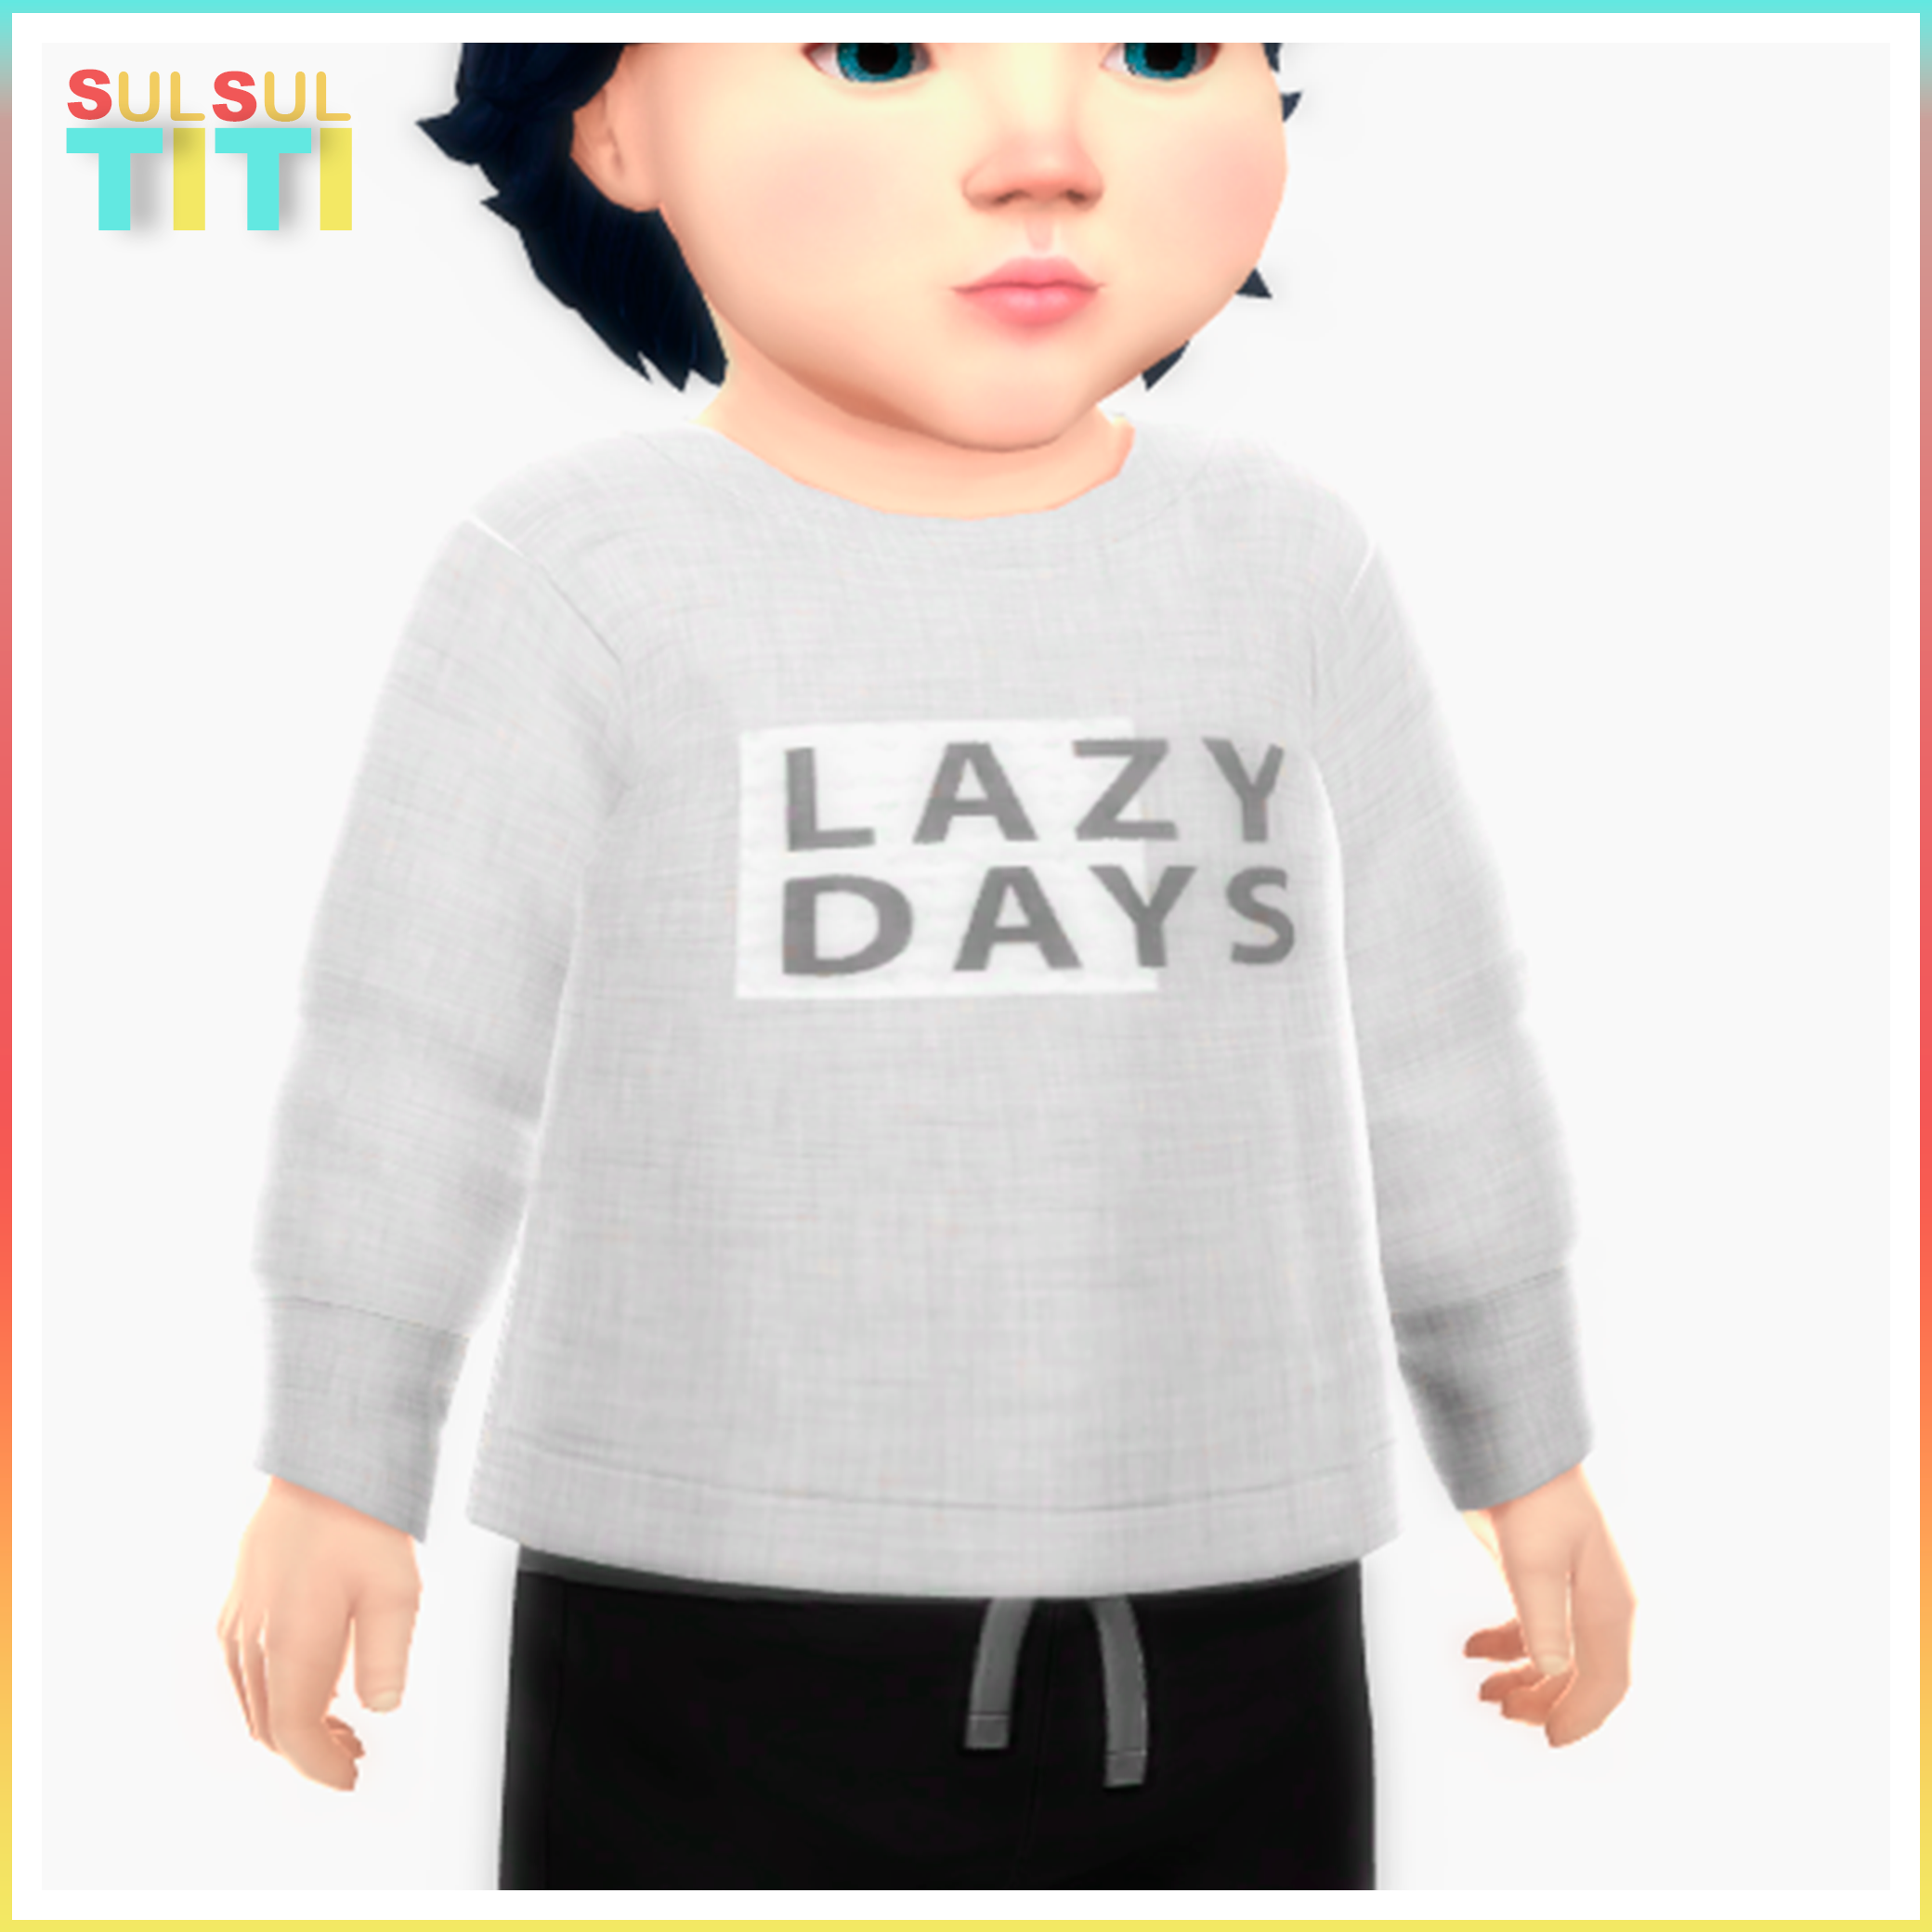 Lazy Days - Sweater Infant - Screenshots - The Sims 4 Create a Sim ...